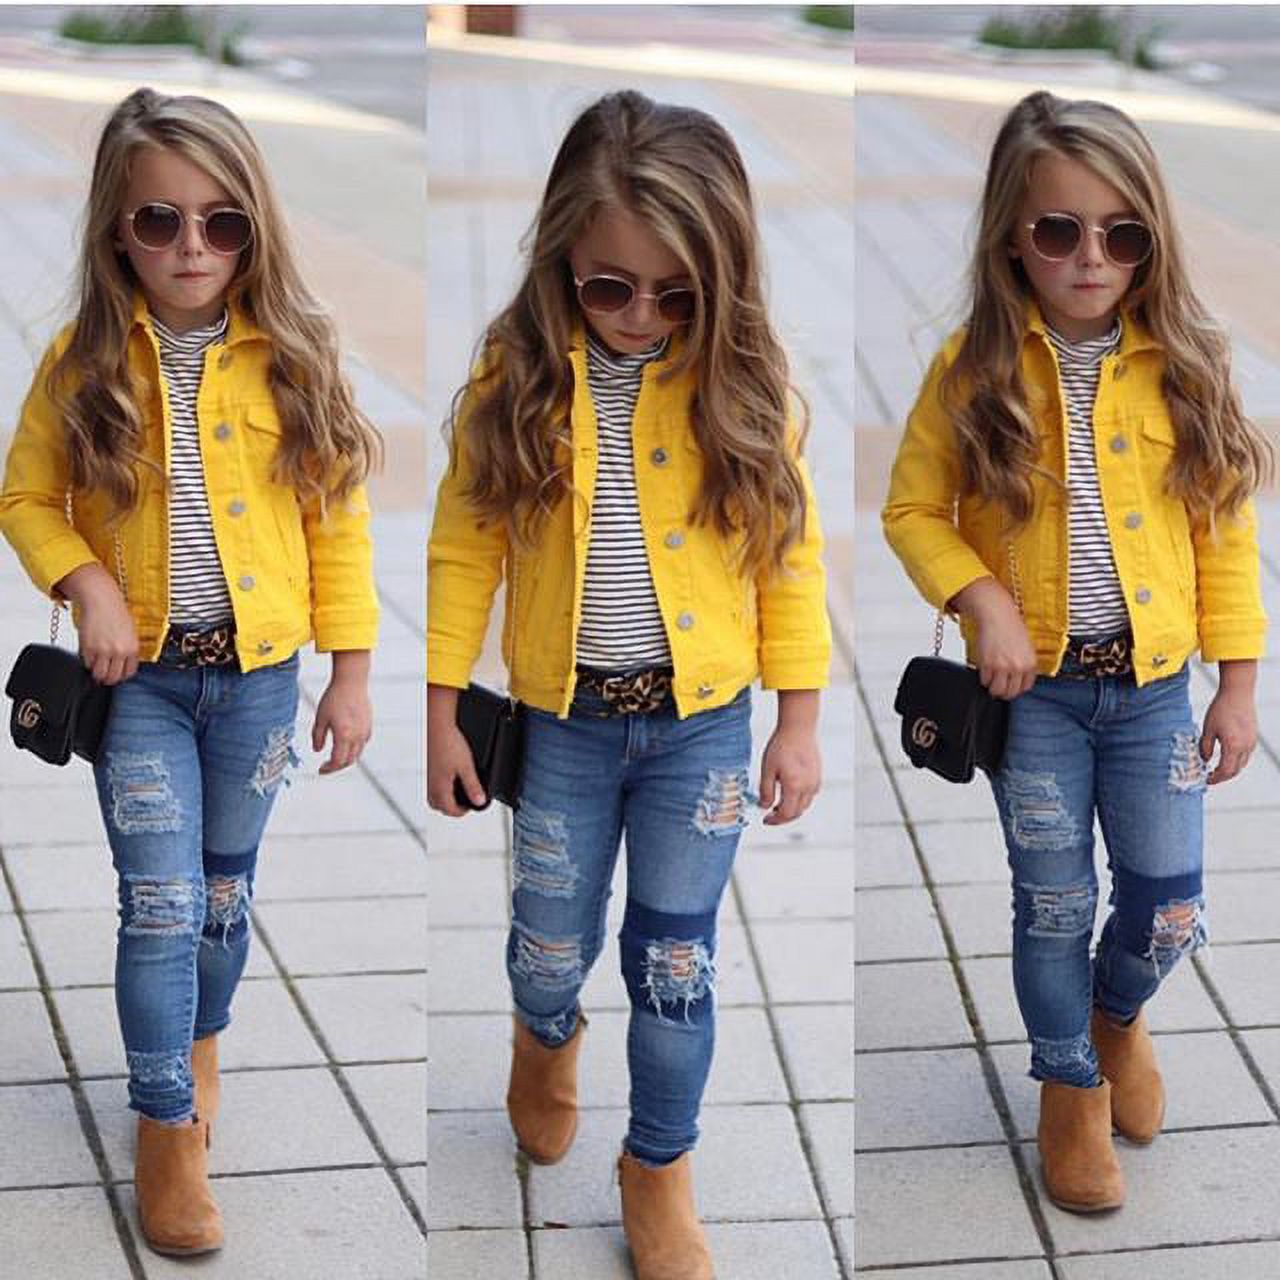 Bmnmsl Princess Kids Baby Girls Boys Denim Jacket Button Coat Outerwear Tops Clothes - image 4 of 4